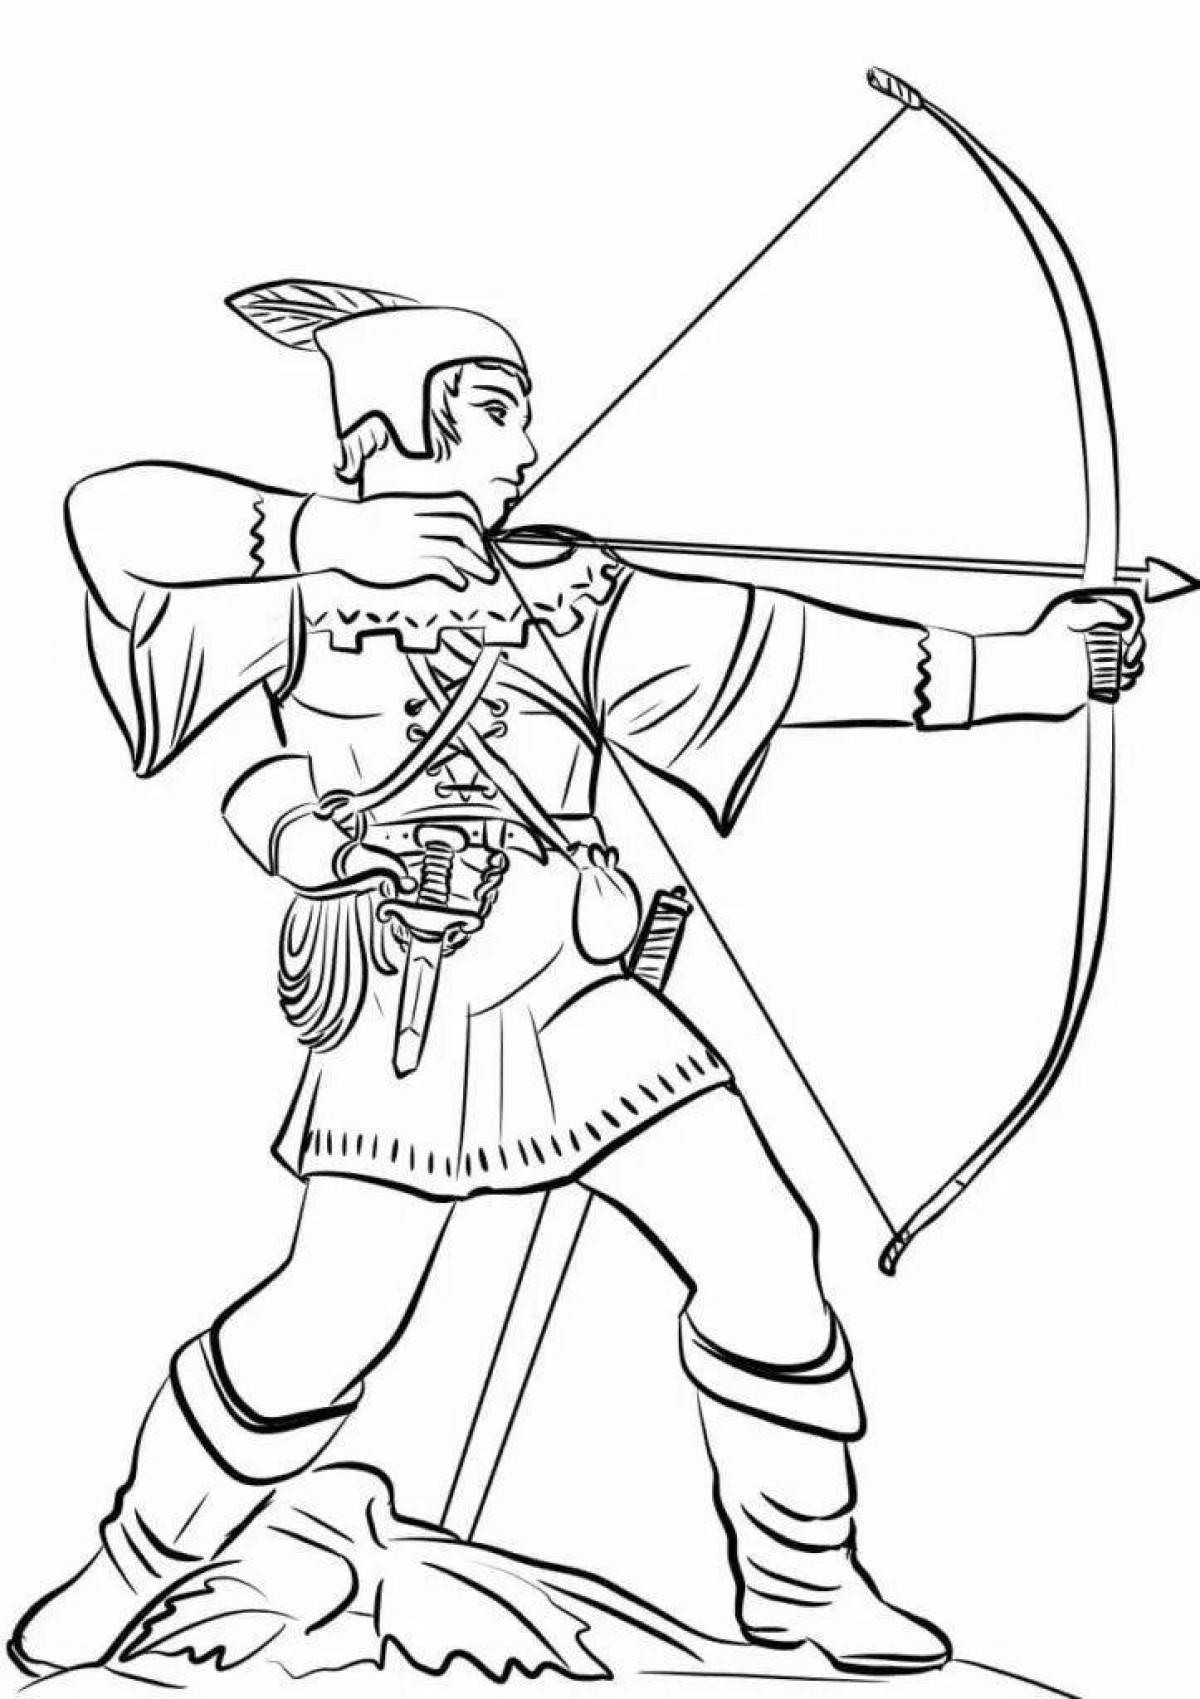 Undefeated warrior coloring page